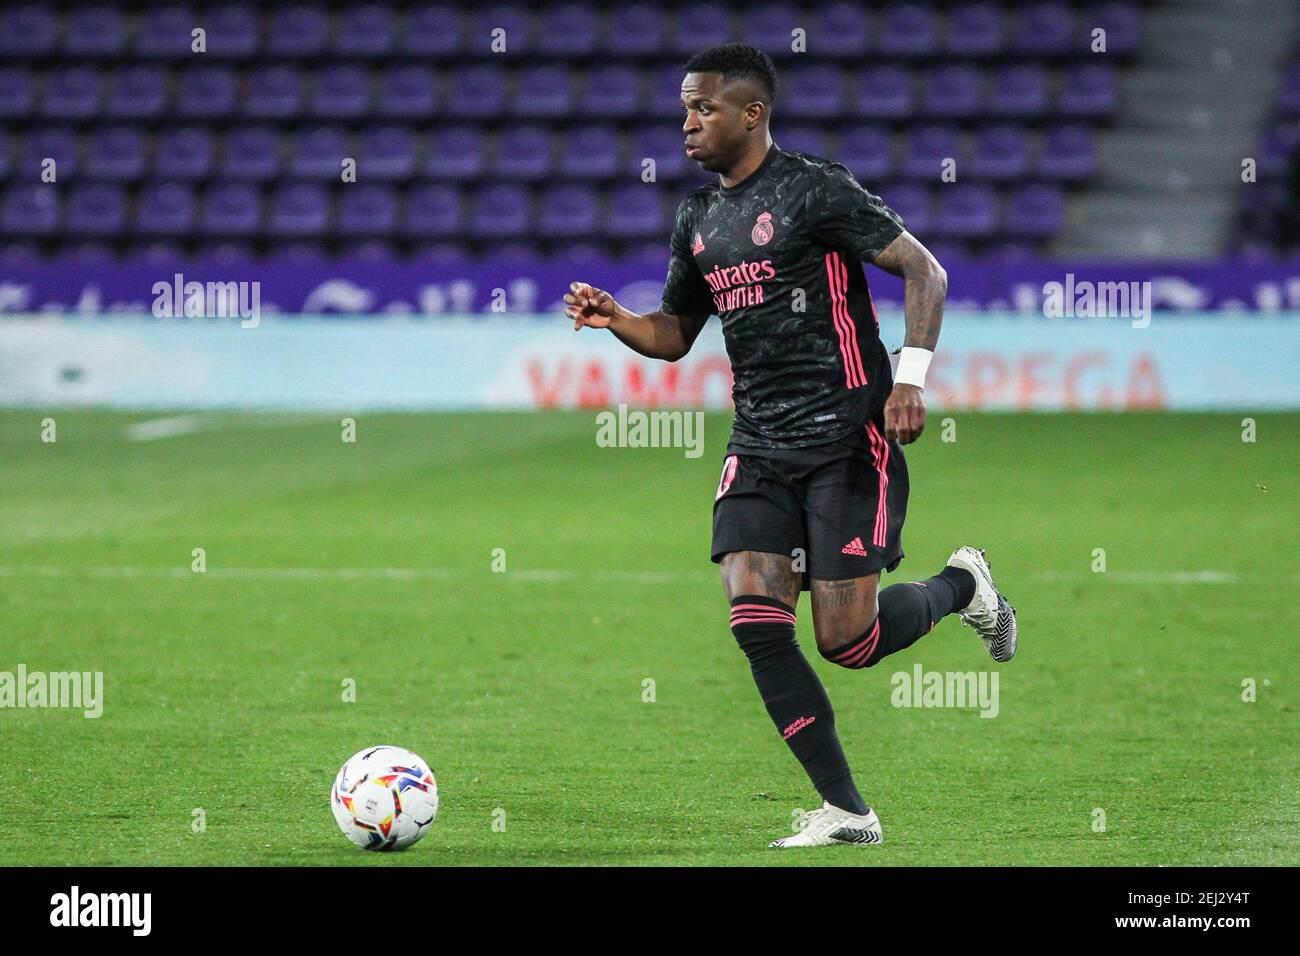 Vinicius Jr of Real Madrid during the Spanish championship La Liga football match between Real Valladolid and Real Madrid on February 20 / LM Stock Photo